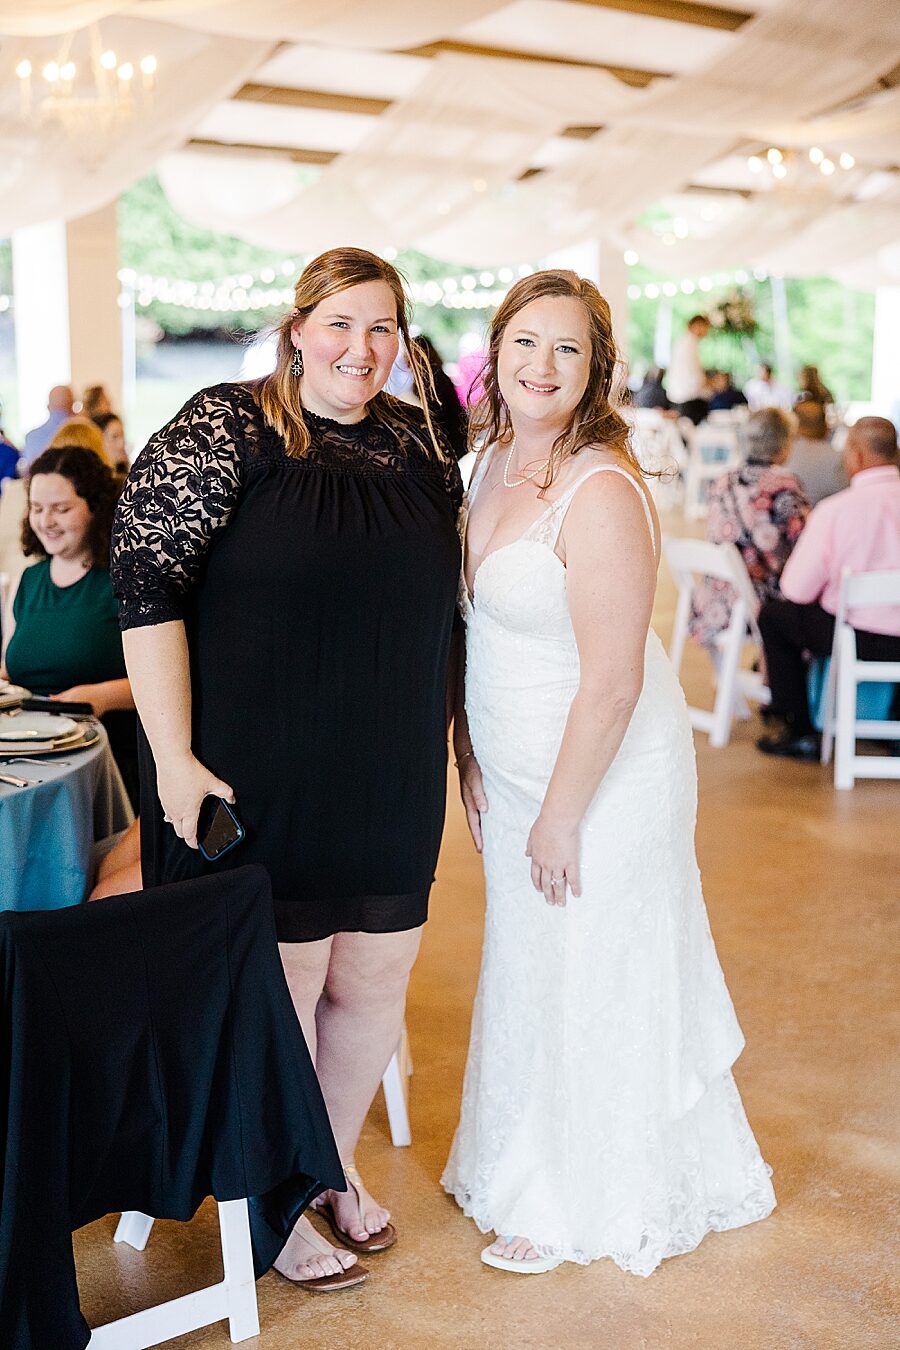 Smiling with guests at Castleton Farms Wedding by Amanda May Photos